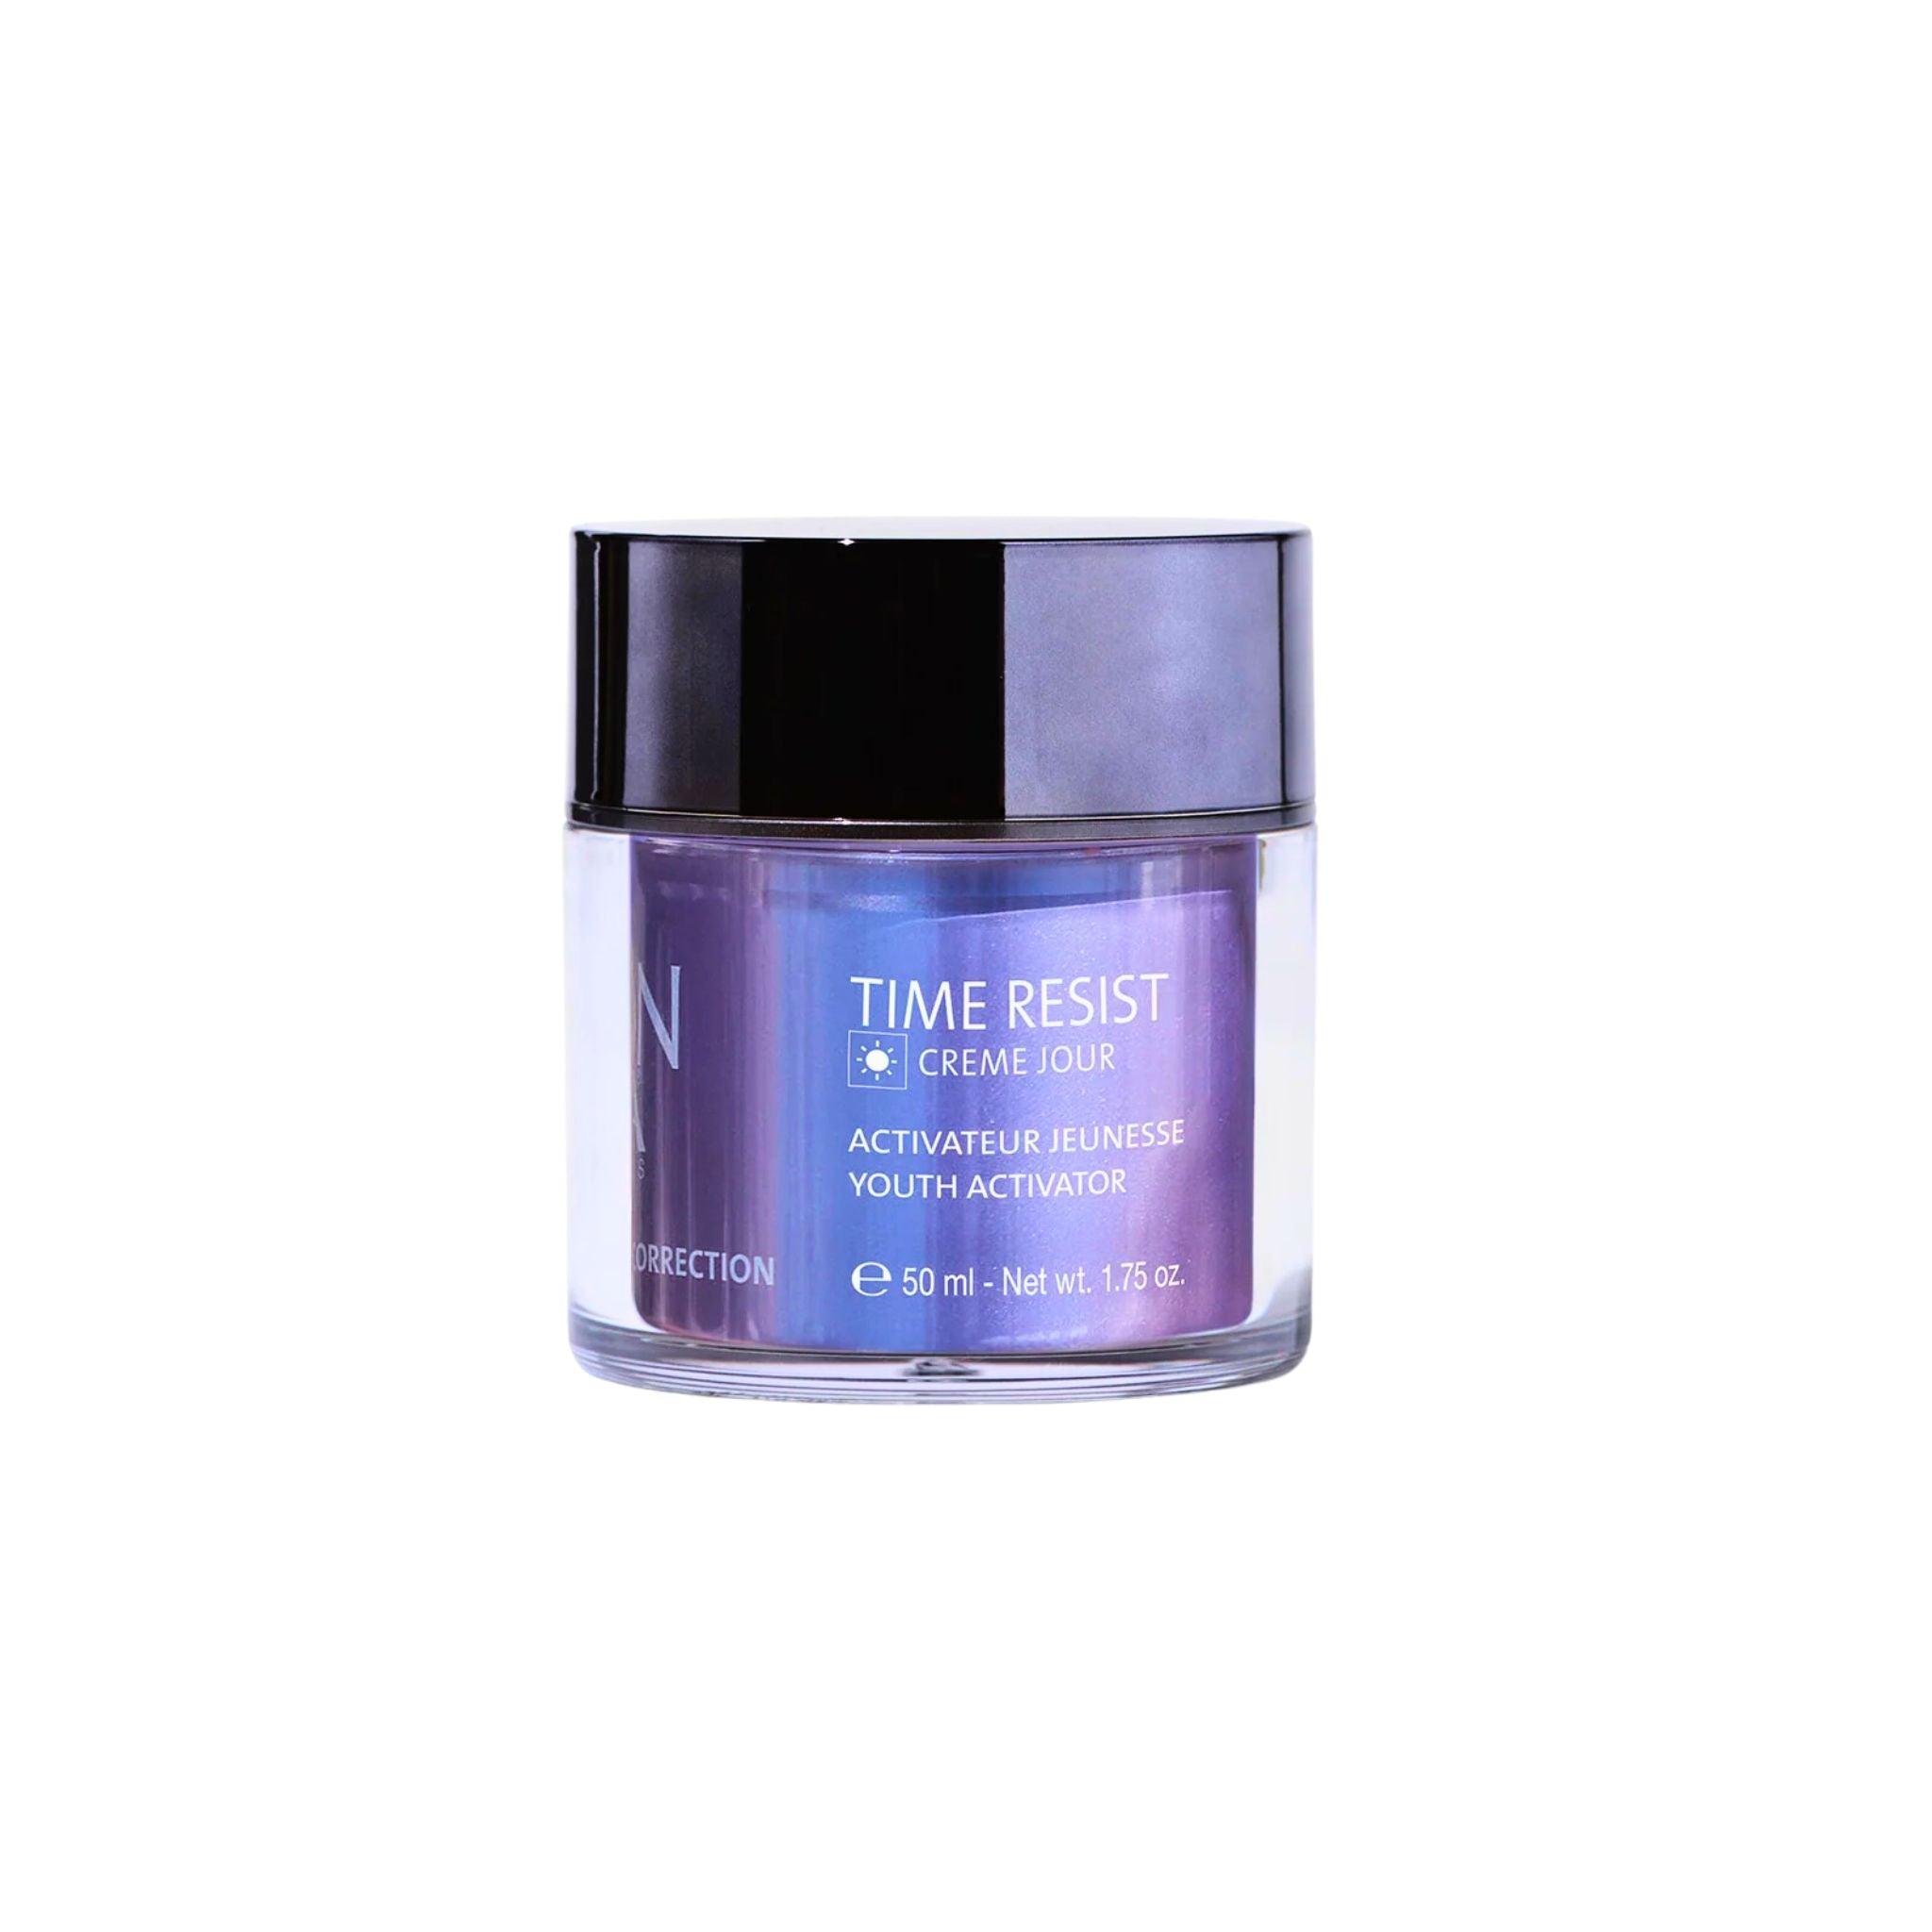 YonKa Time Resist Creme Jour (Day Cream) - The Beauty House Shop